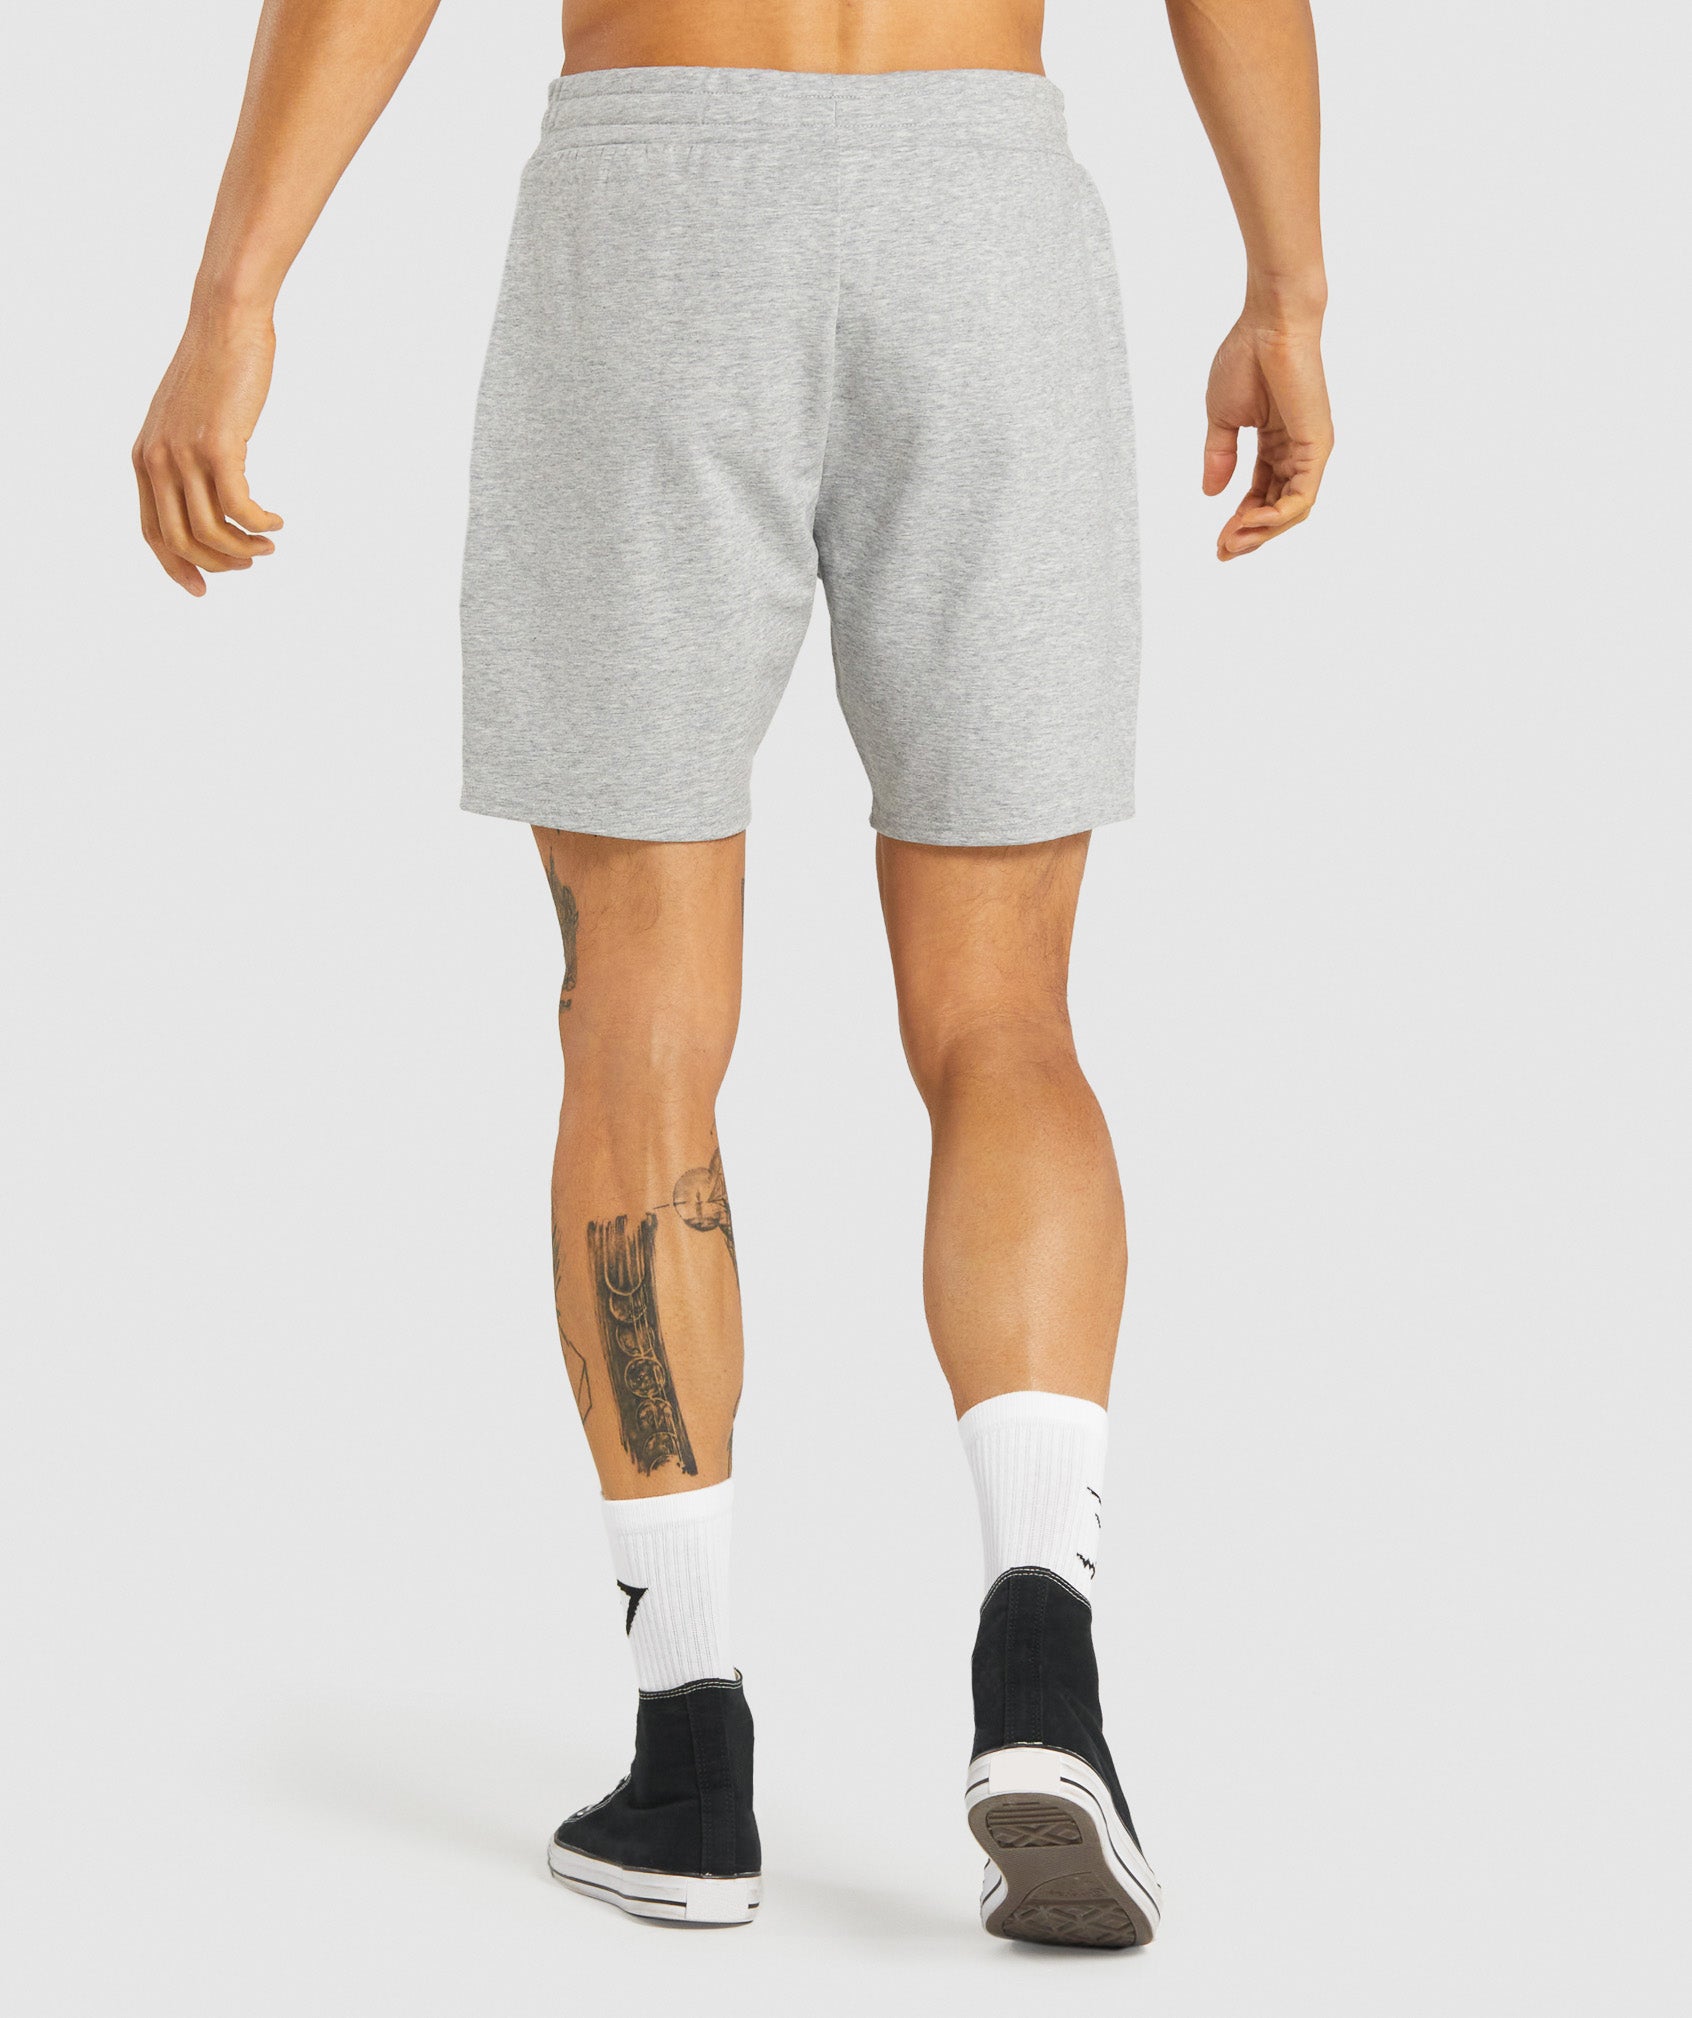 Critical 7" Shorts in Light Grey Core Marl - view 2